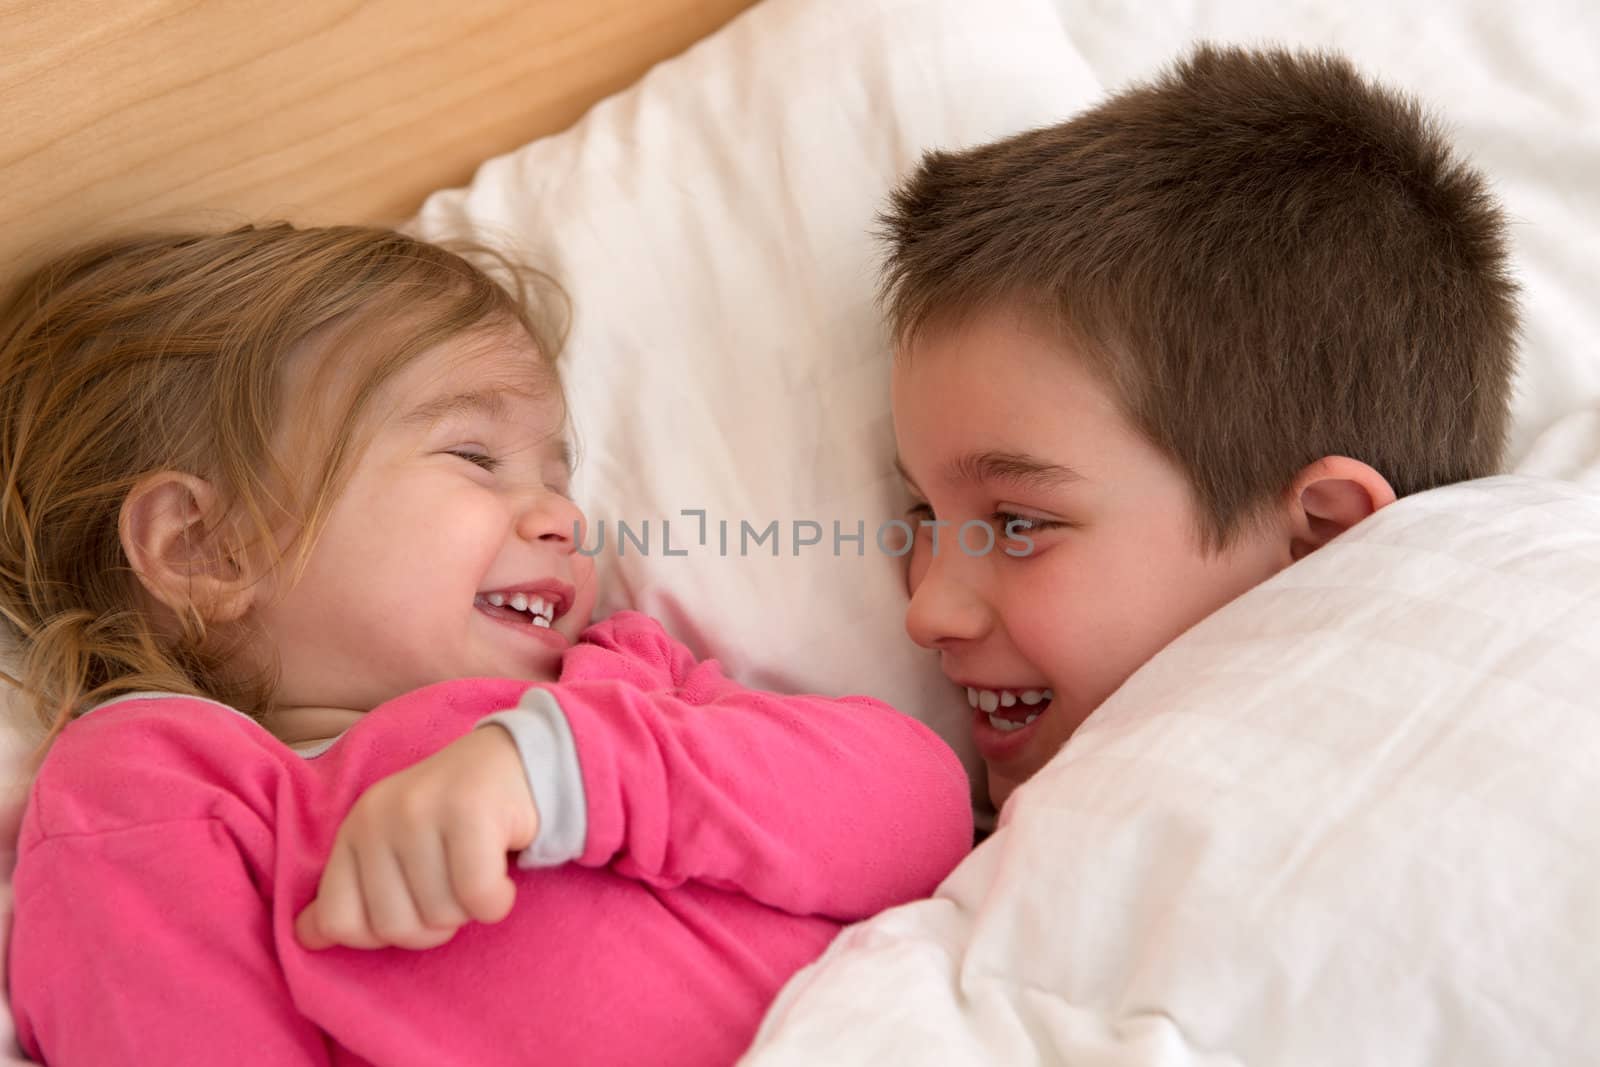 Siblings laughing at each other in the bed, happy cozy moments.